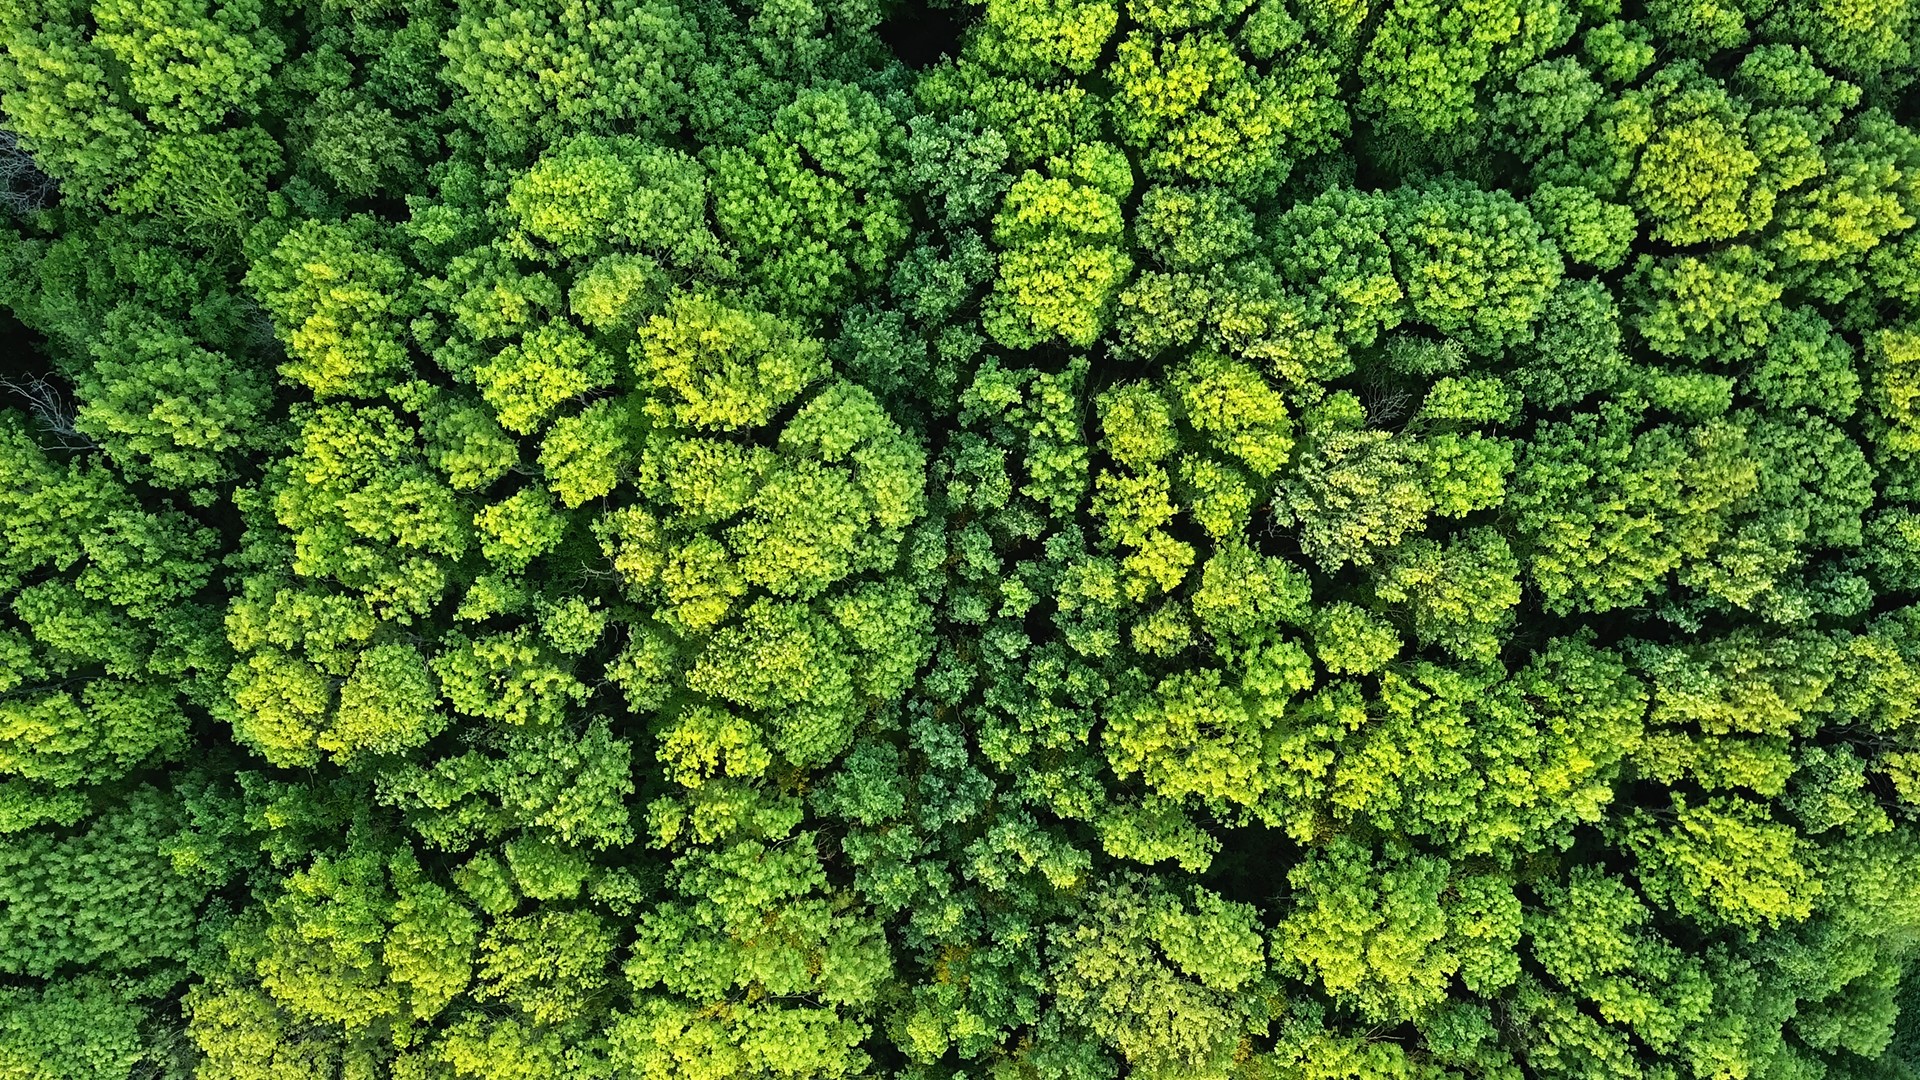 Arial shot of a vibrant green forest